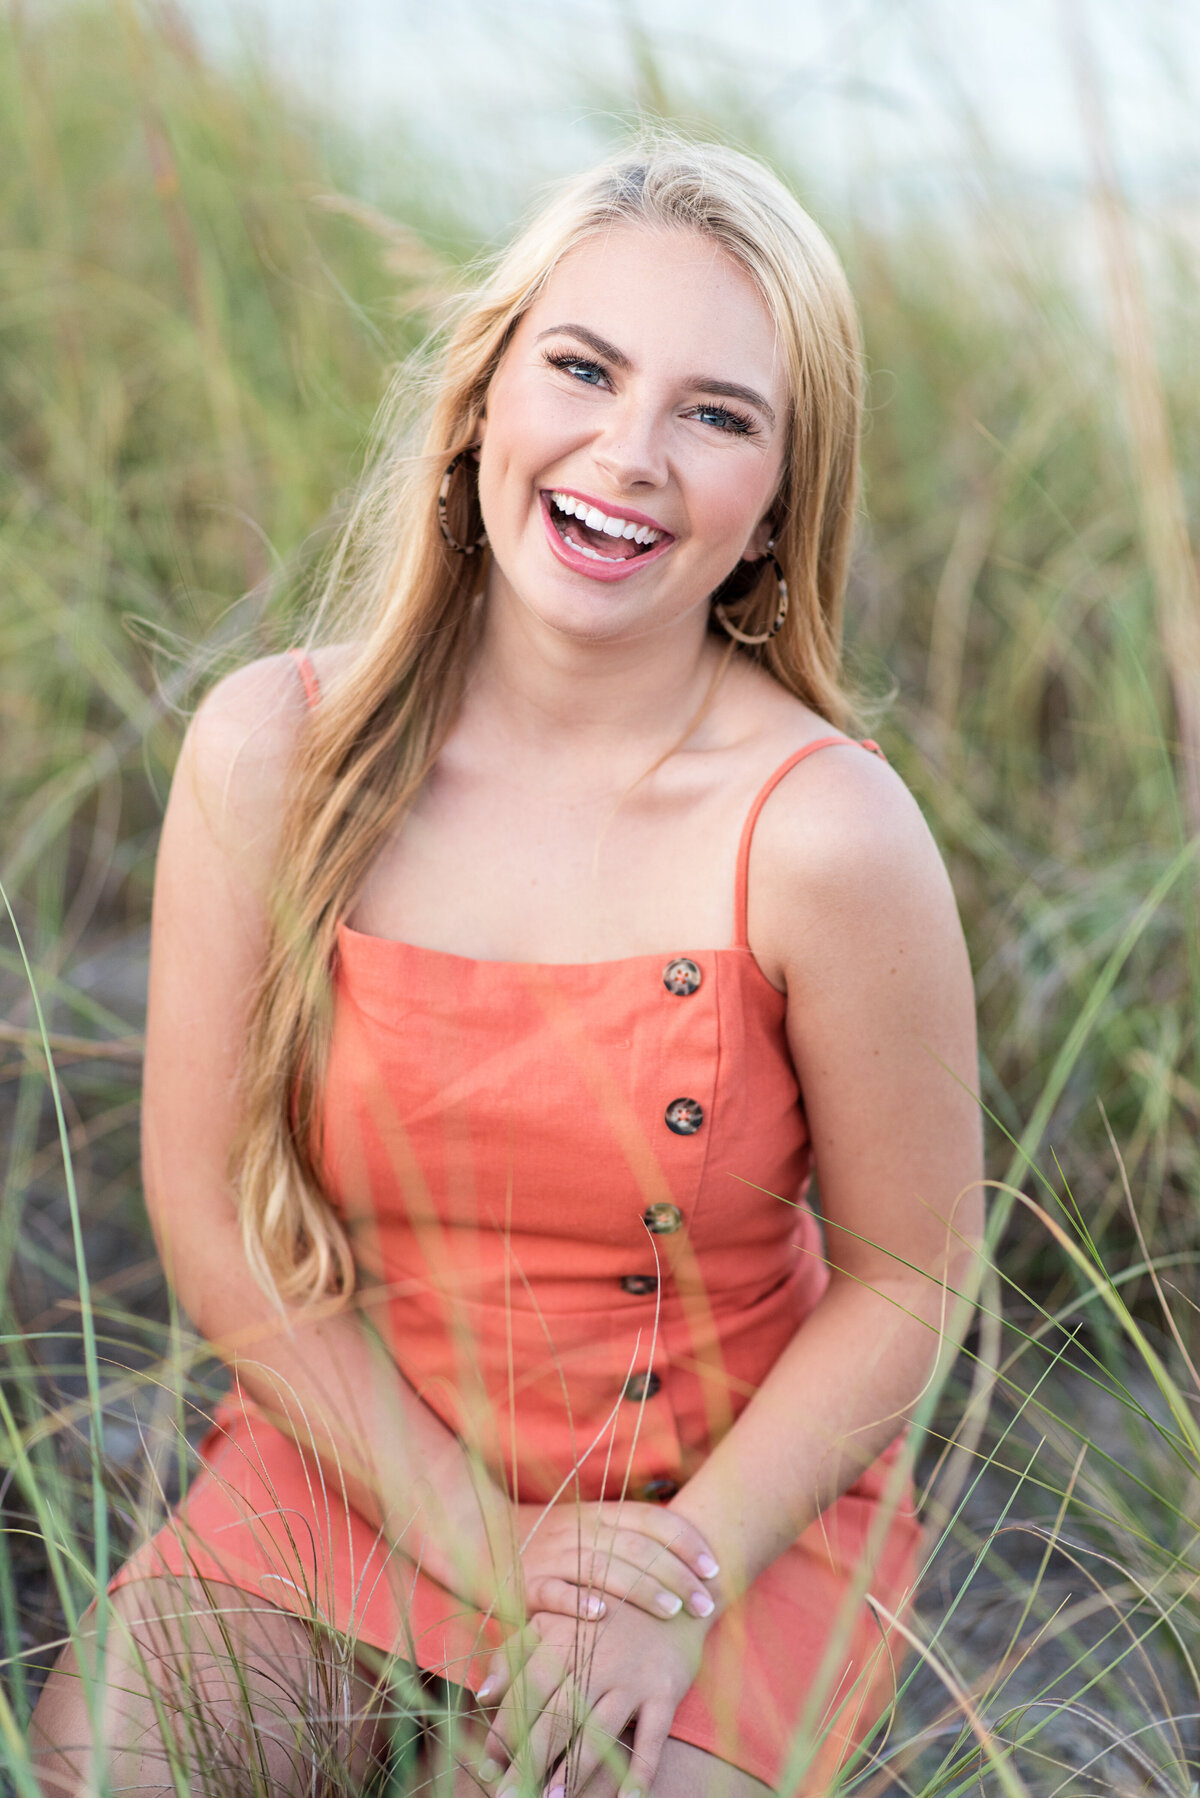 Clover Hill high school student laughs during her senior portrait session while kneeling in tall beach grass at Yorktown Beach, VA.